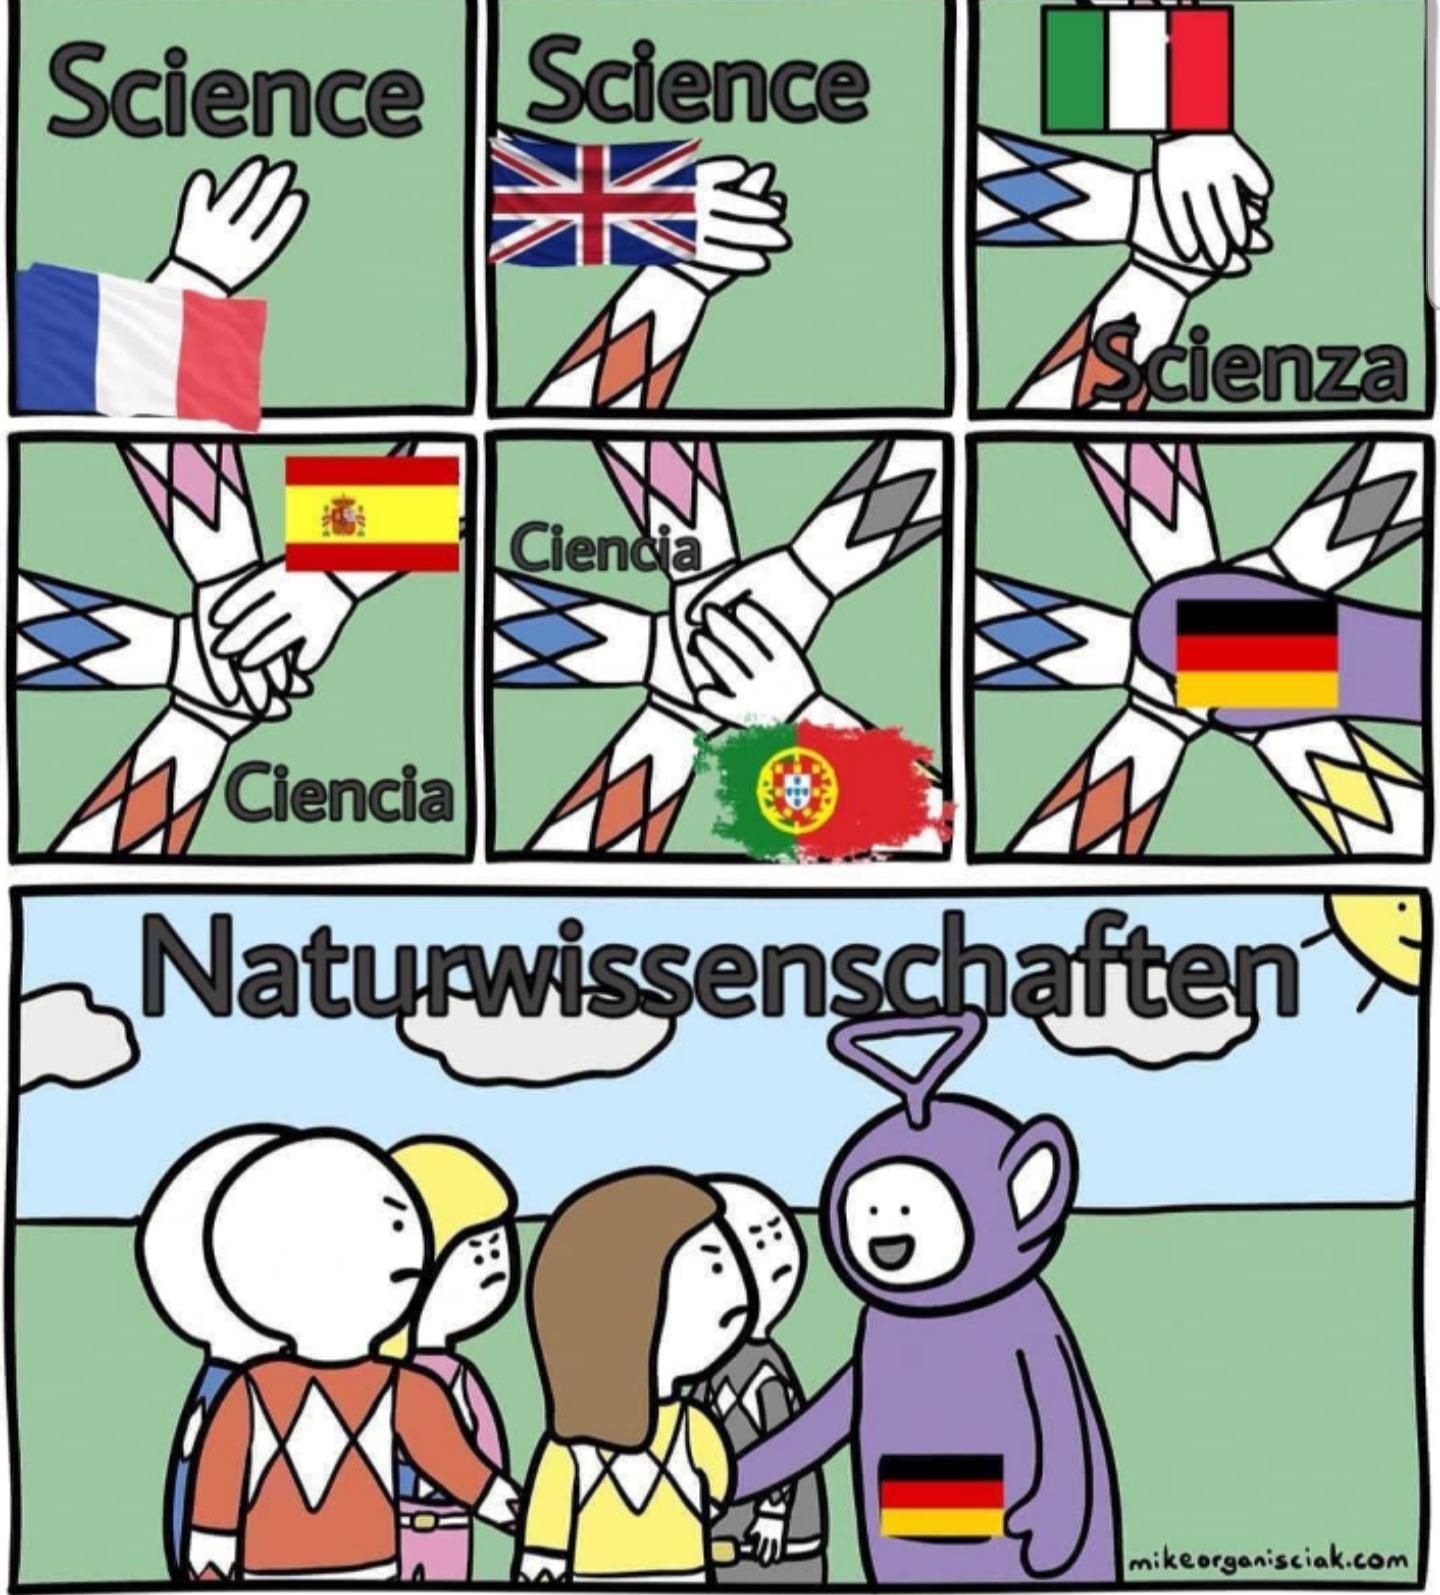 Germany is always different